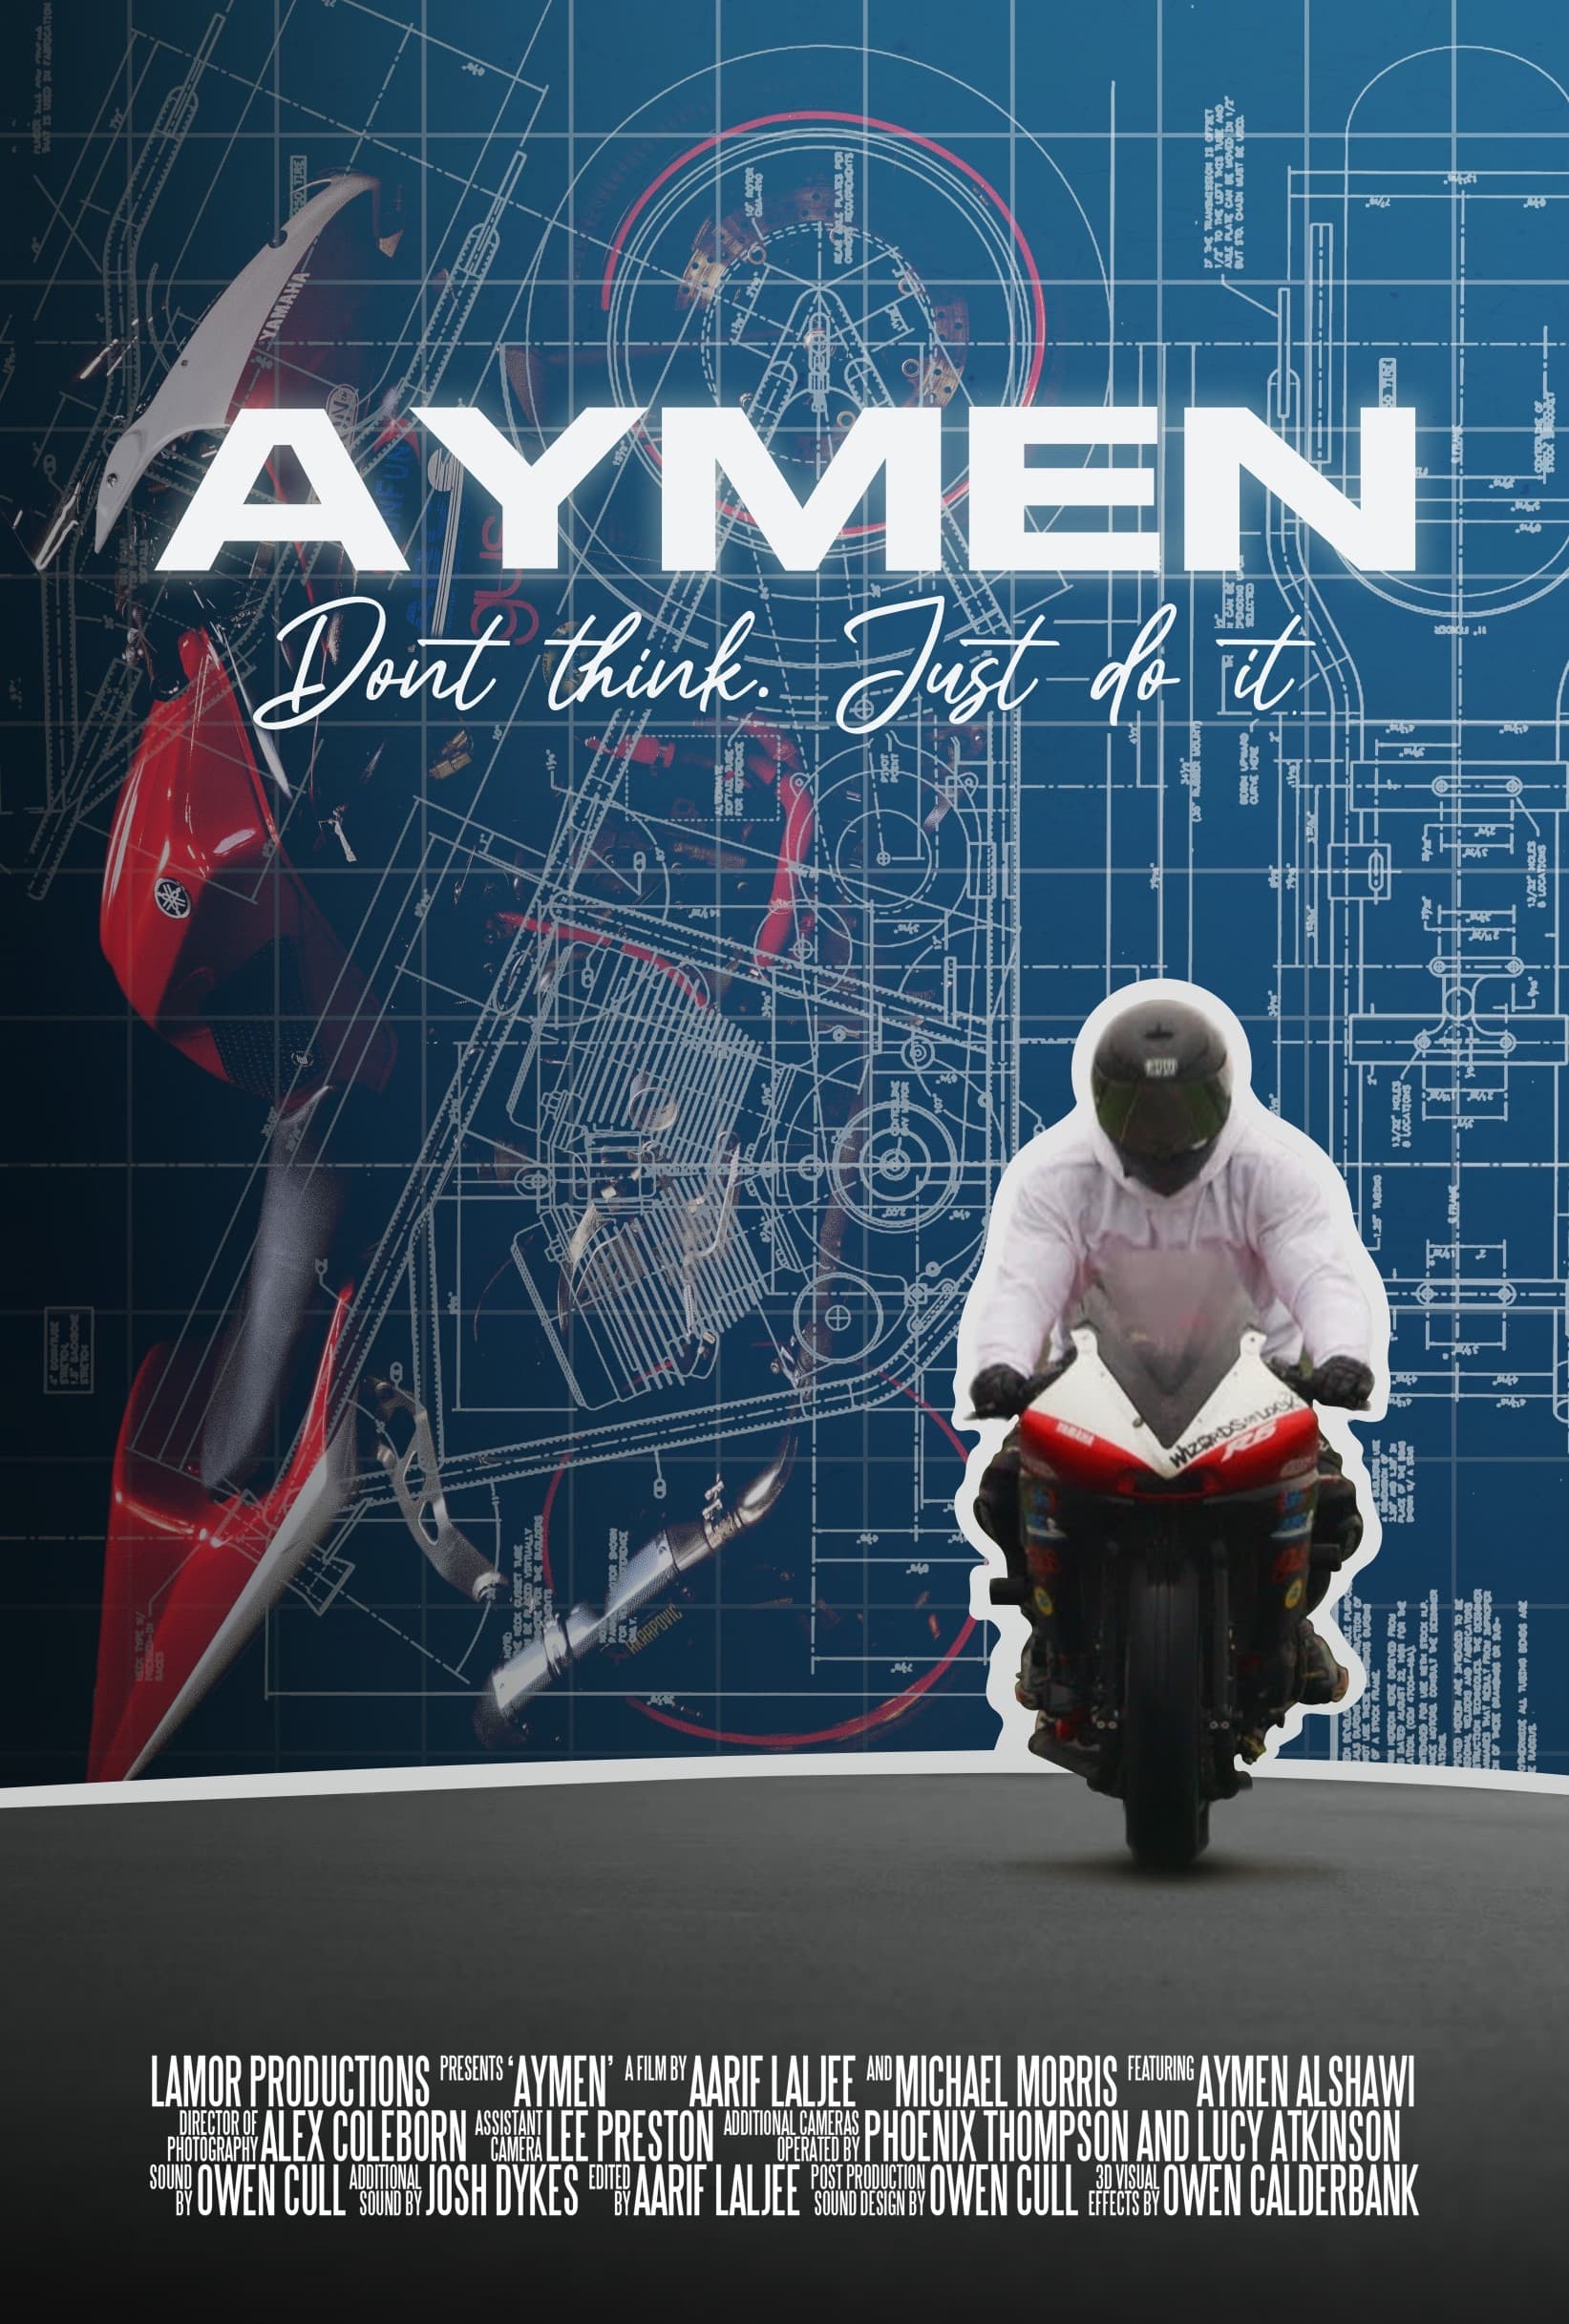 Aymen - Don't think, just do it!